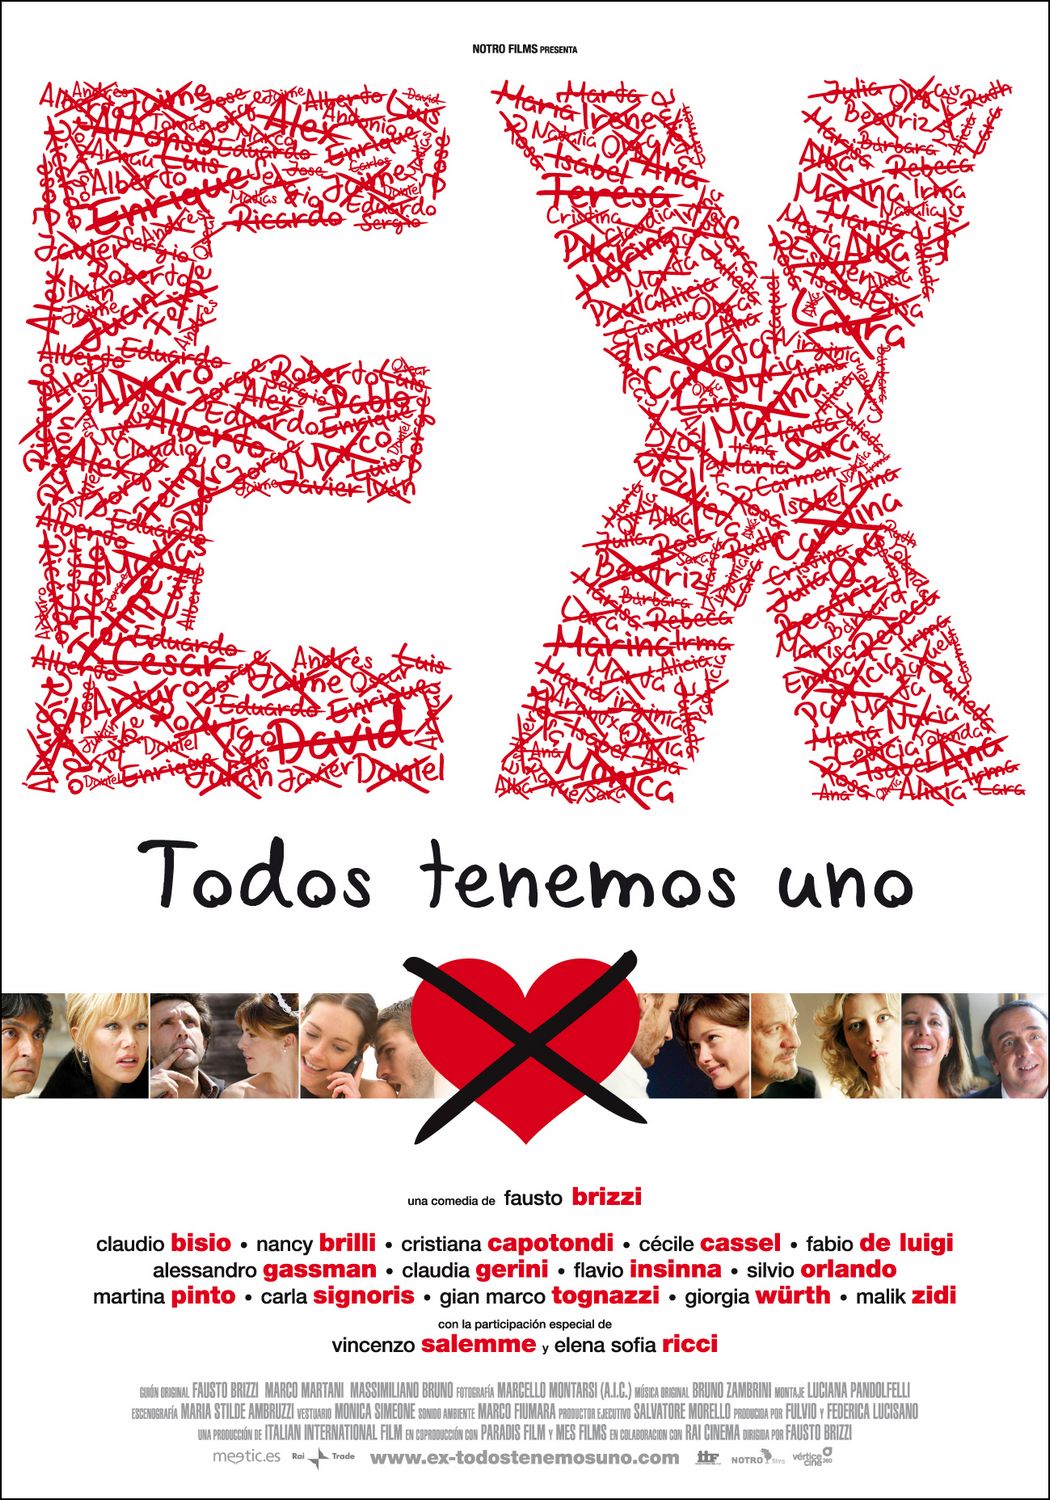 Extra Large Movie Poster Image for Ex (#1 of 2)